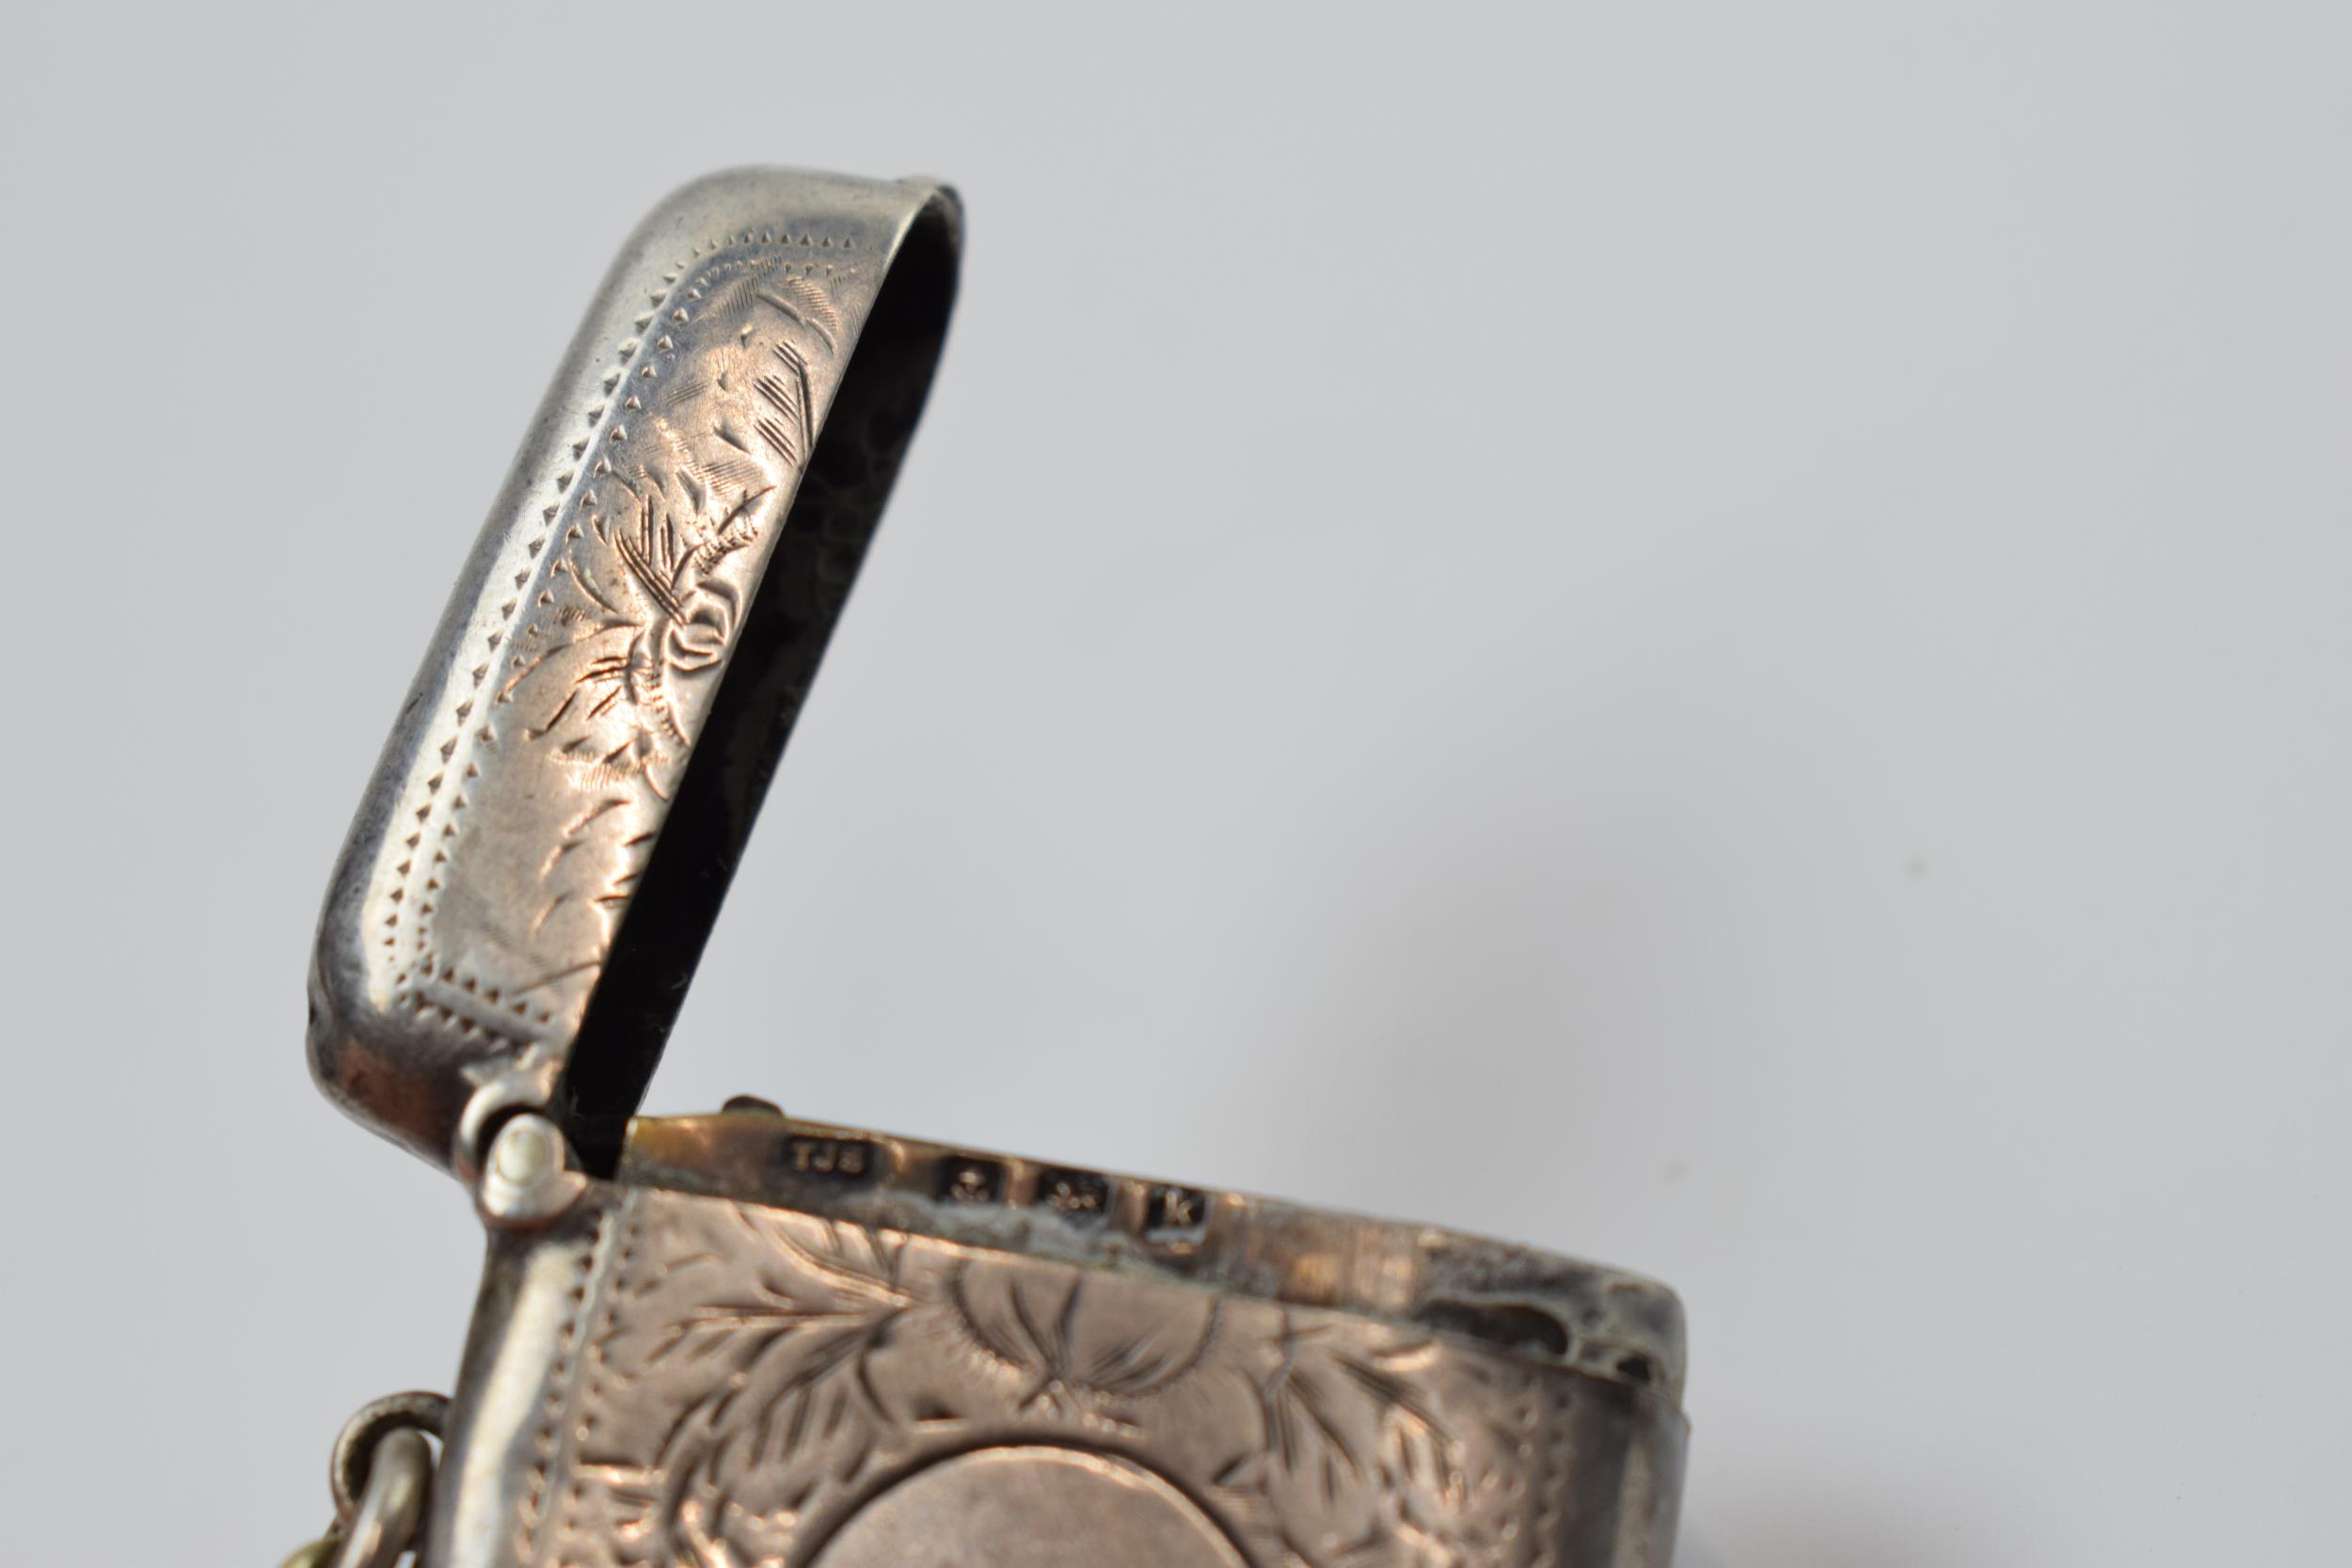 Hallmarked silver vesta case with engraved decoration, Birm 1909, gross weight 21.5 grams. - Image 3 of 3